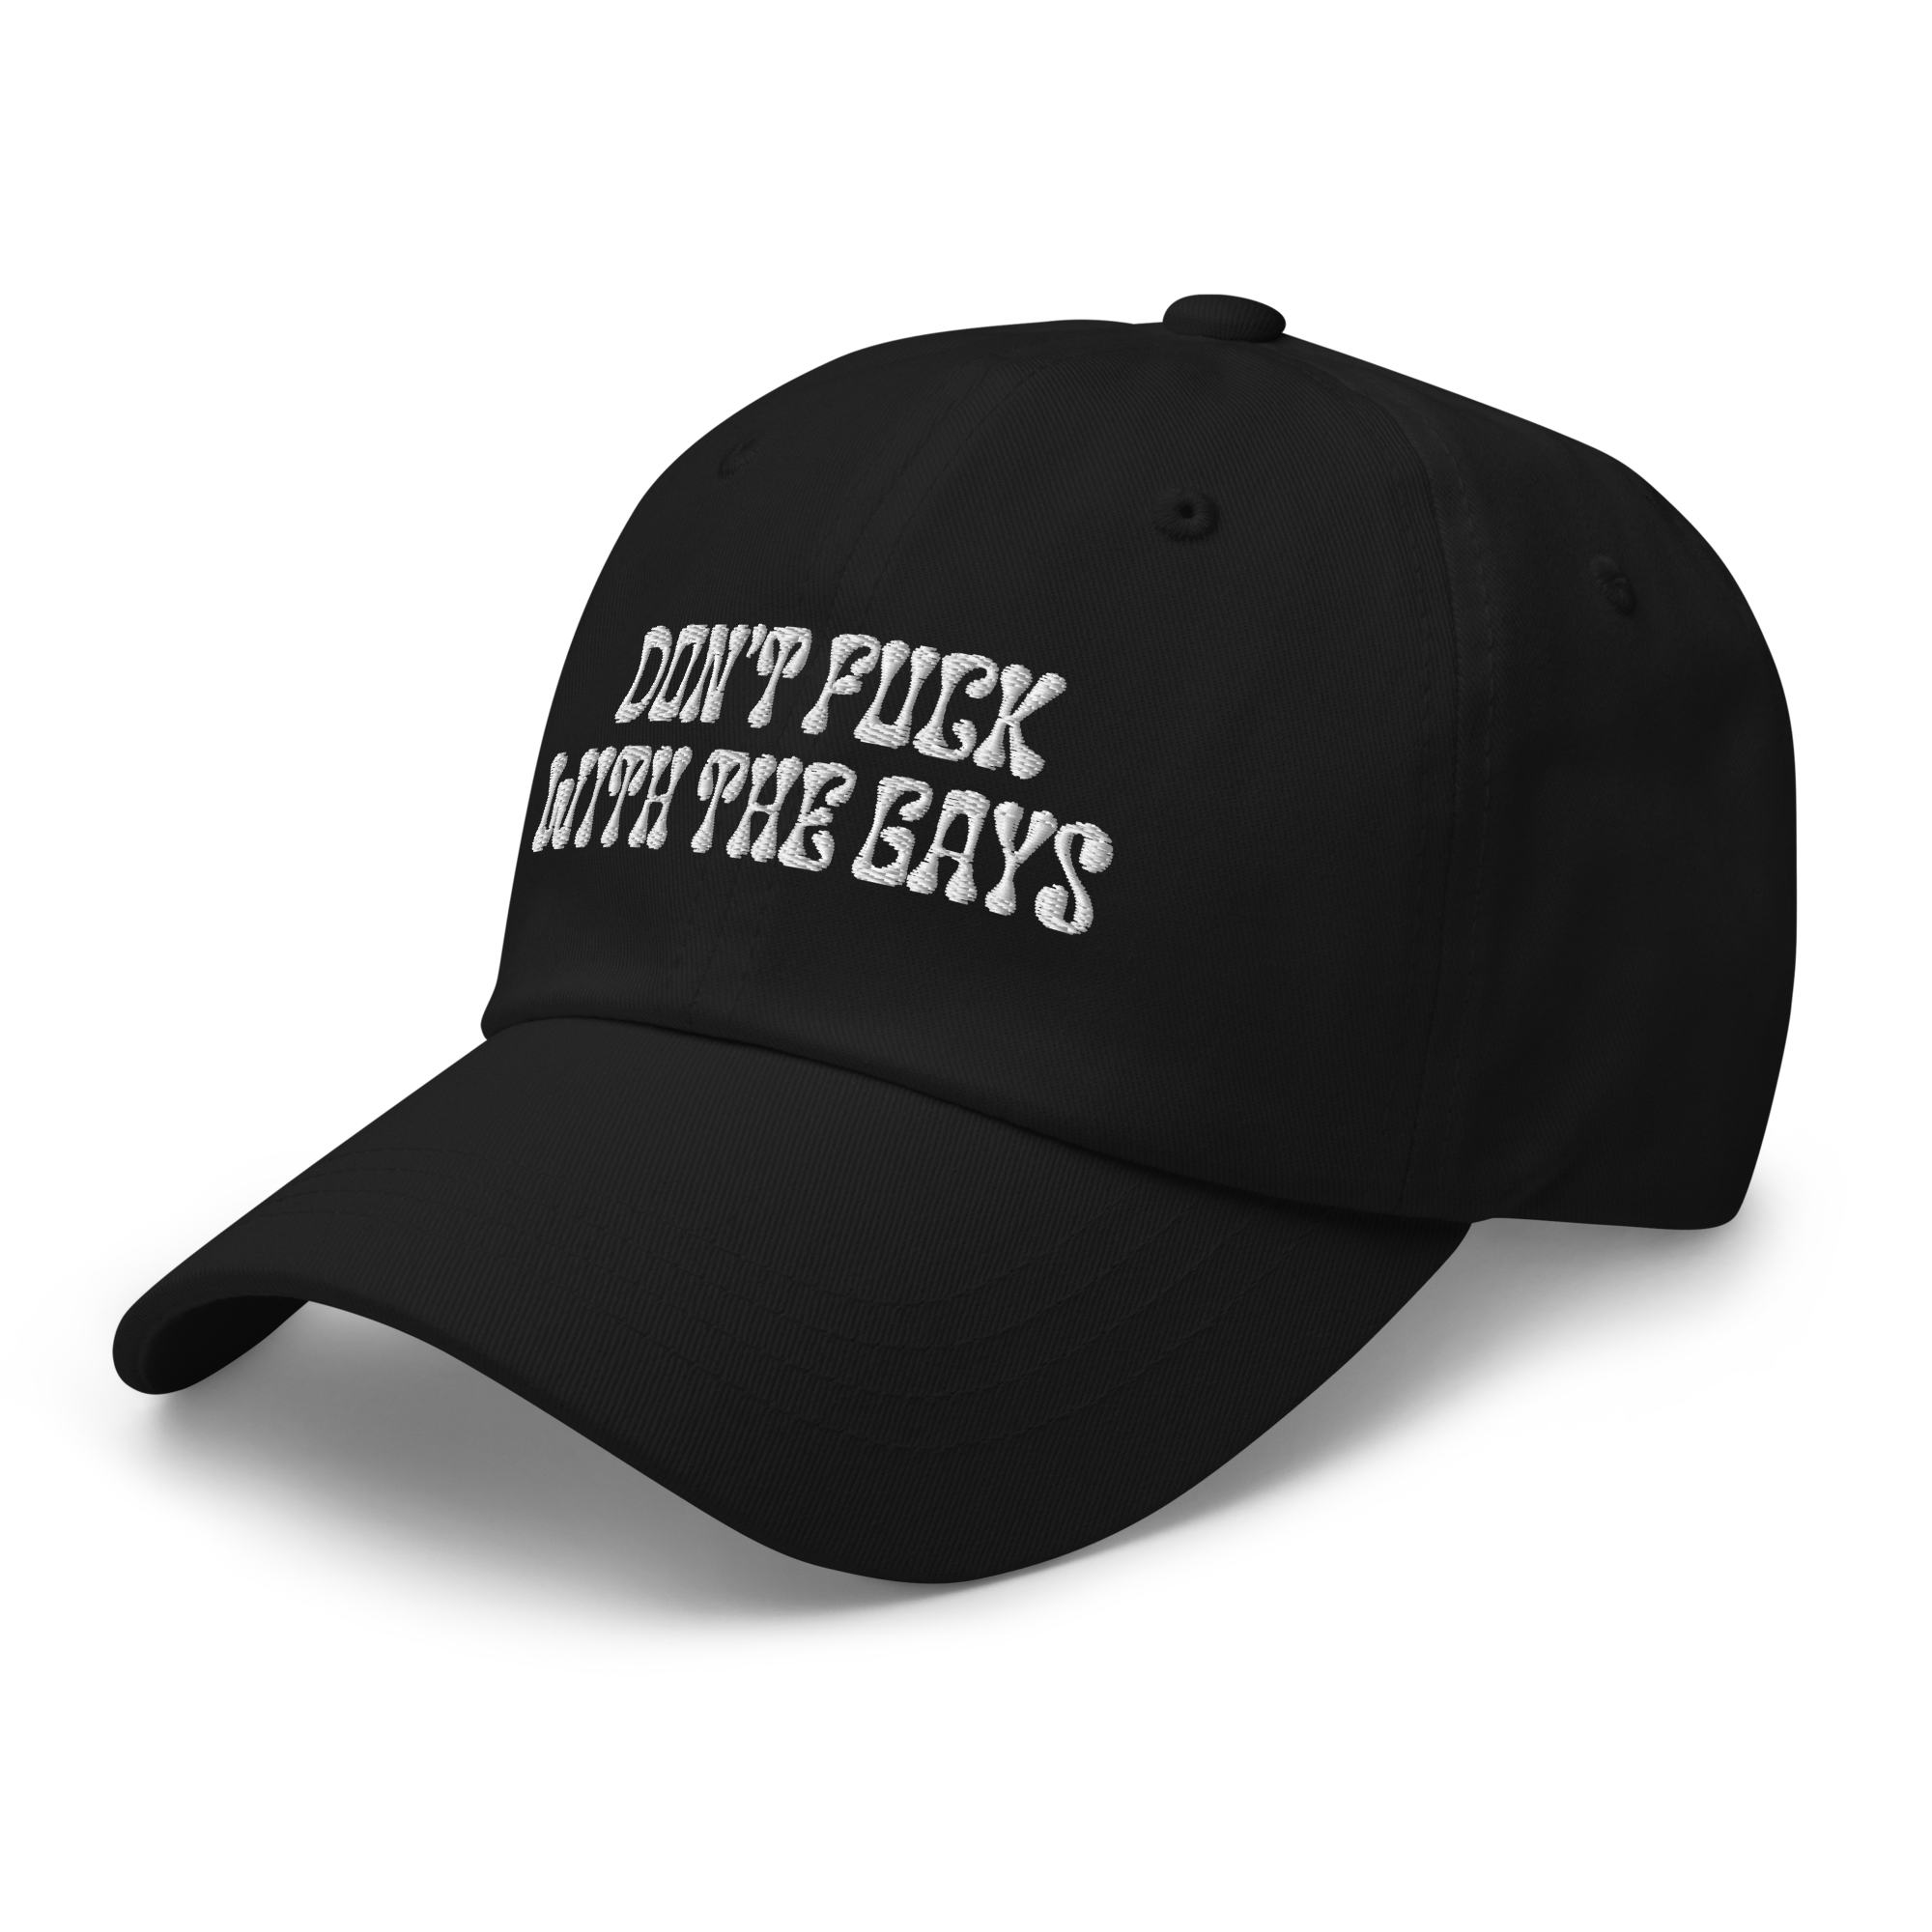 'DON'T FUCK WITH THE GAYS' DAD CAP